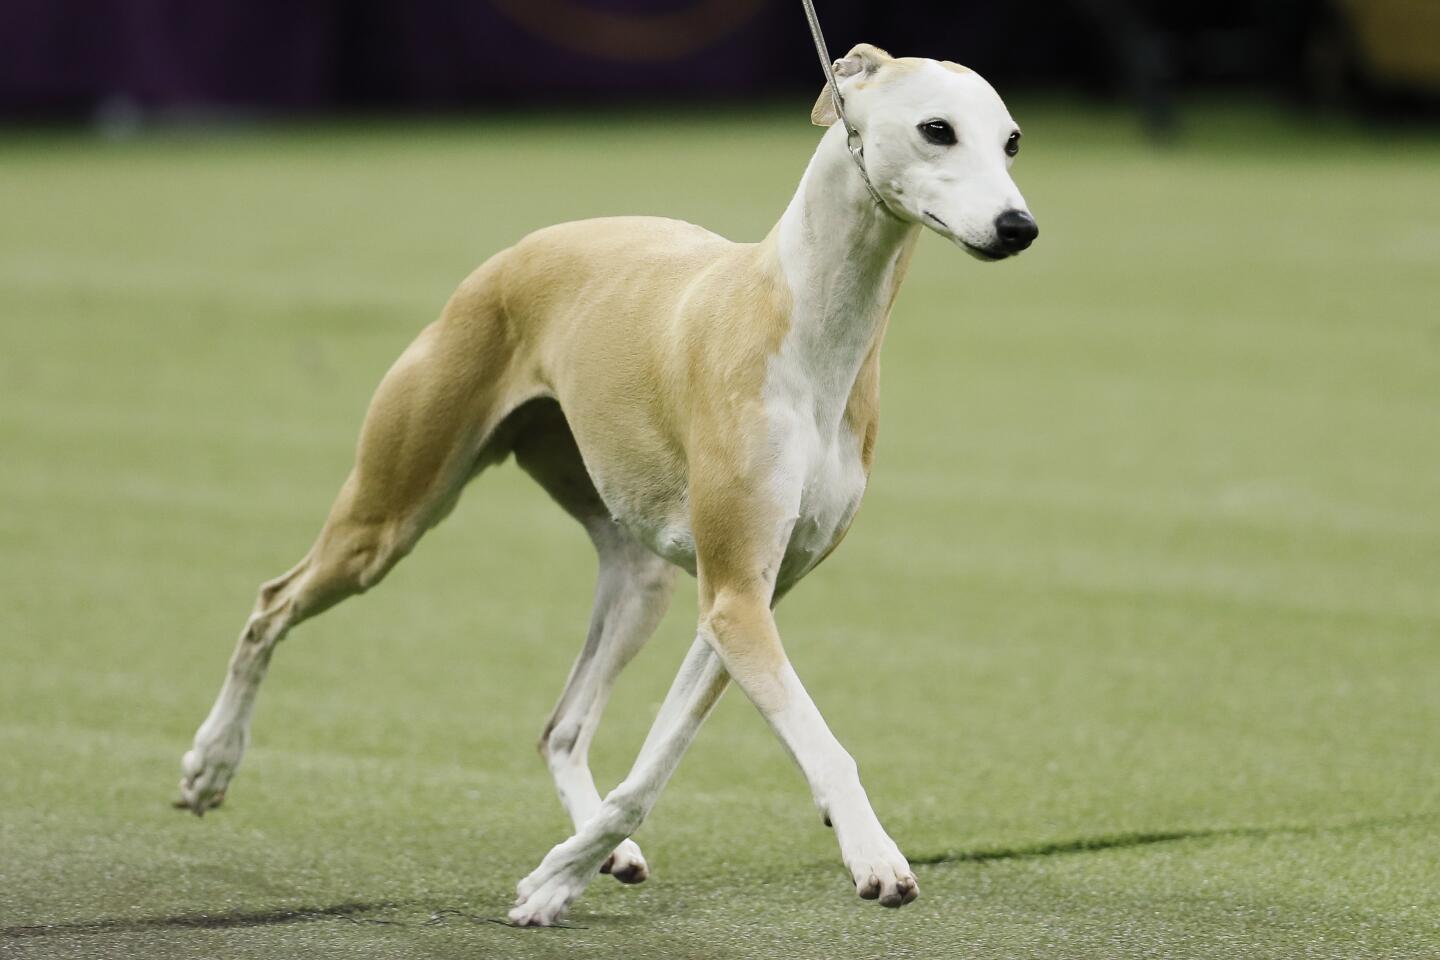 Bourbon the whippet finished second.